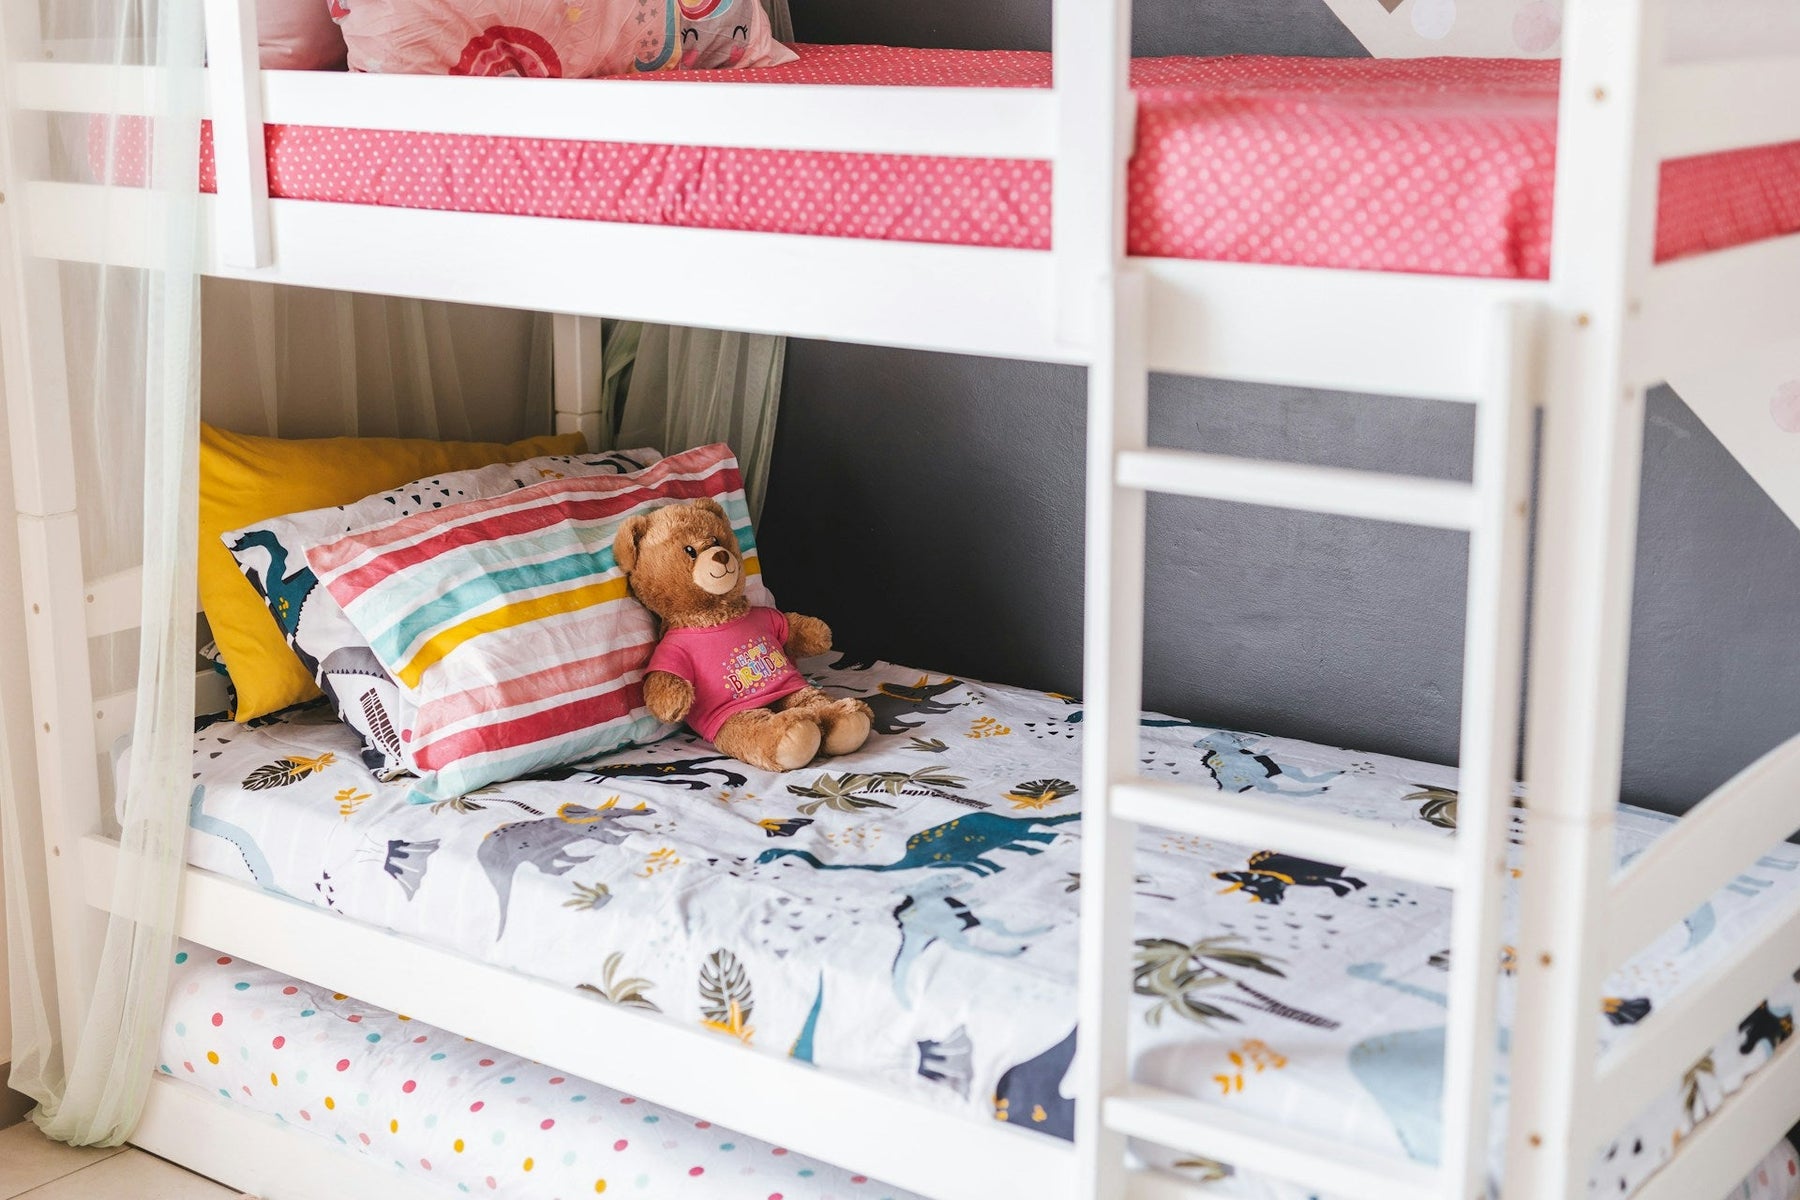 Latest Bunk Bed Trends: UK Sales Insights & Top Picks - Rest Relax